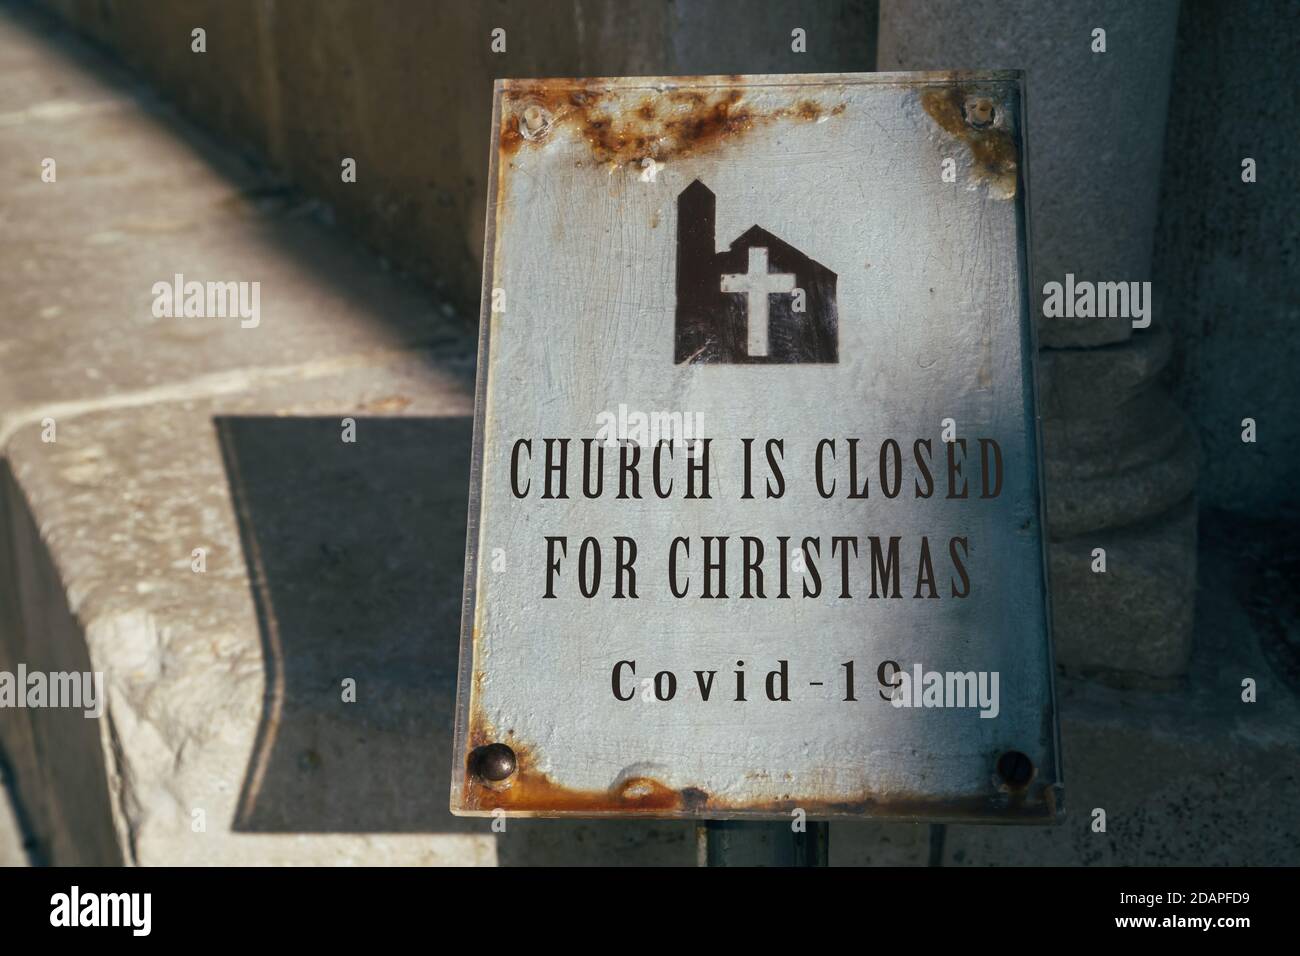 Church is closed for Christmas sign. Cancellation of church services because of coronavirus outbreak. Church and Religion affected by COVID-19. Stock Photo